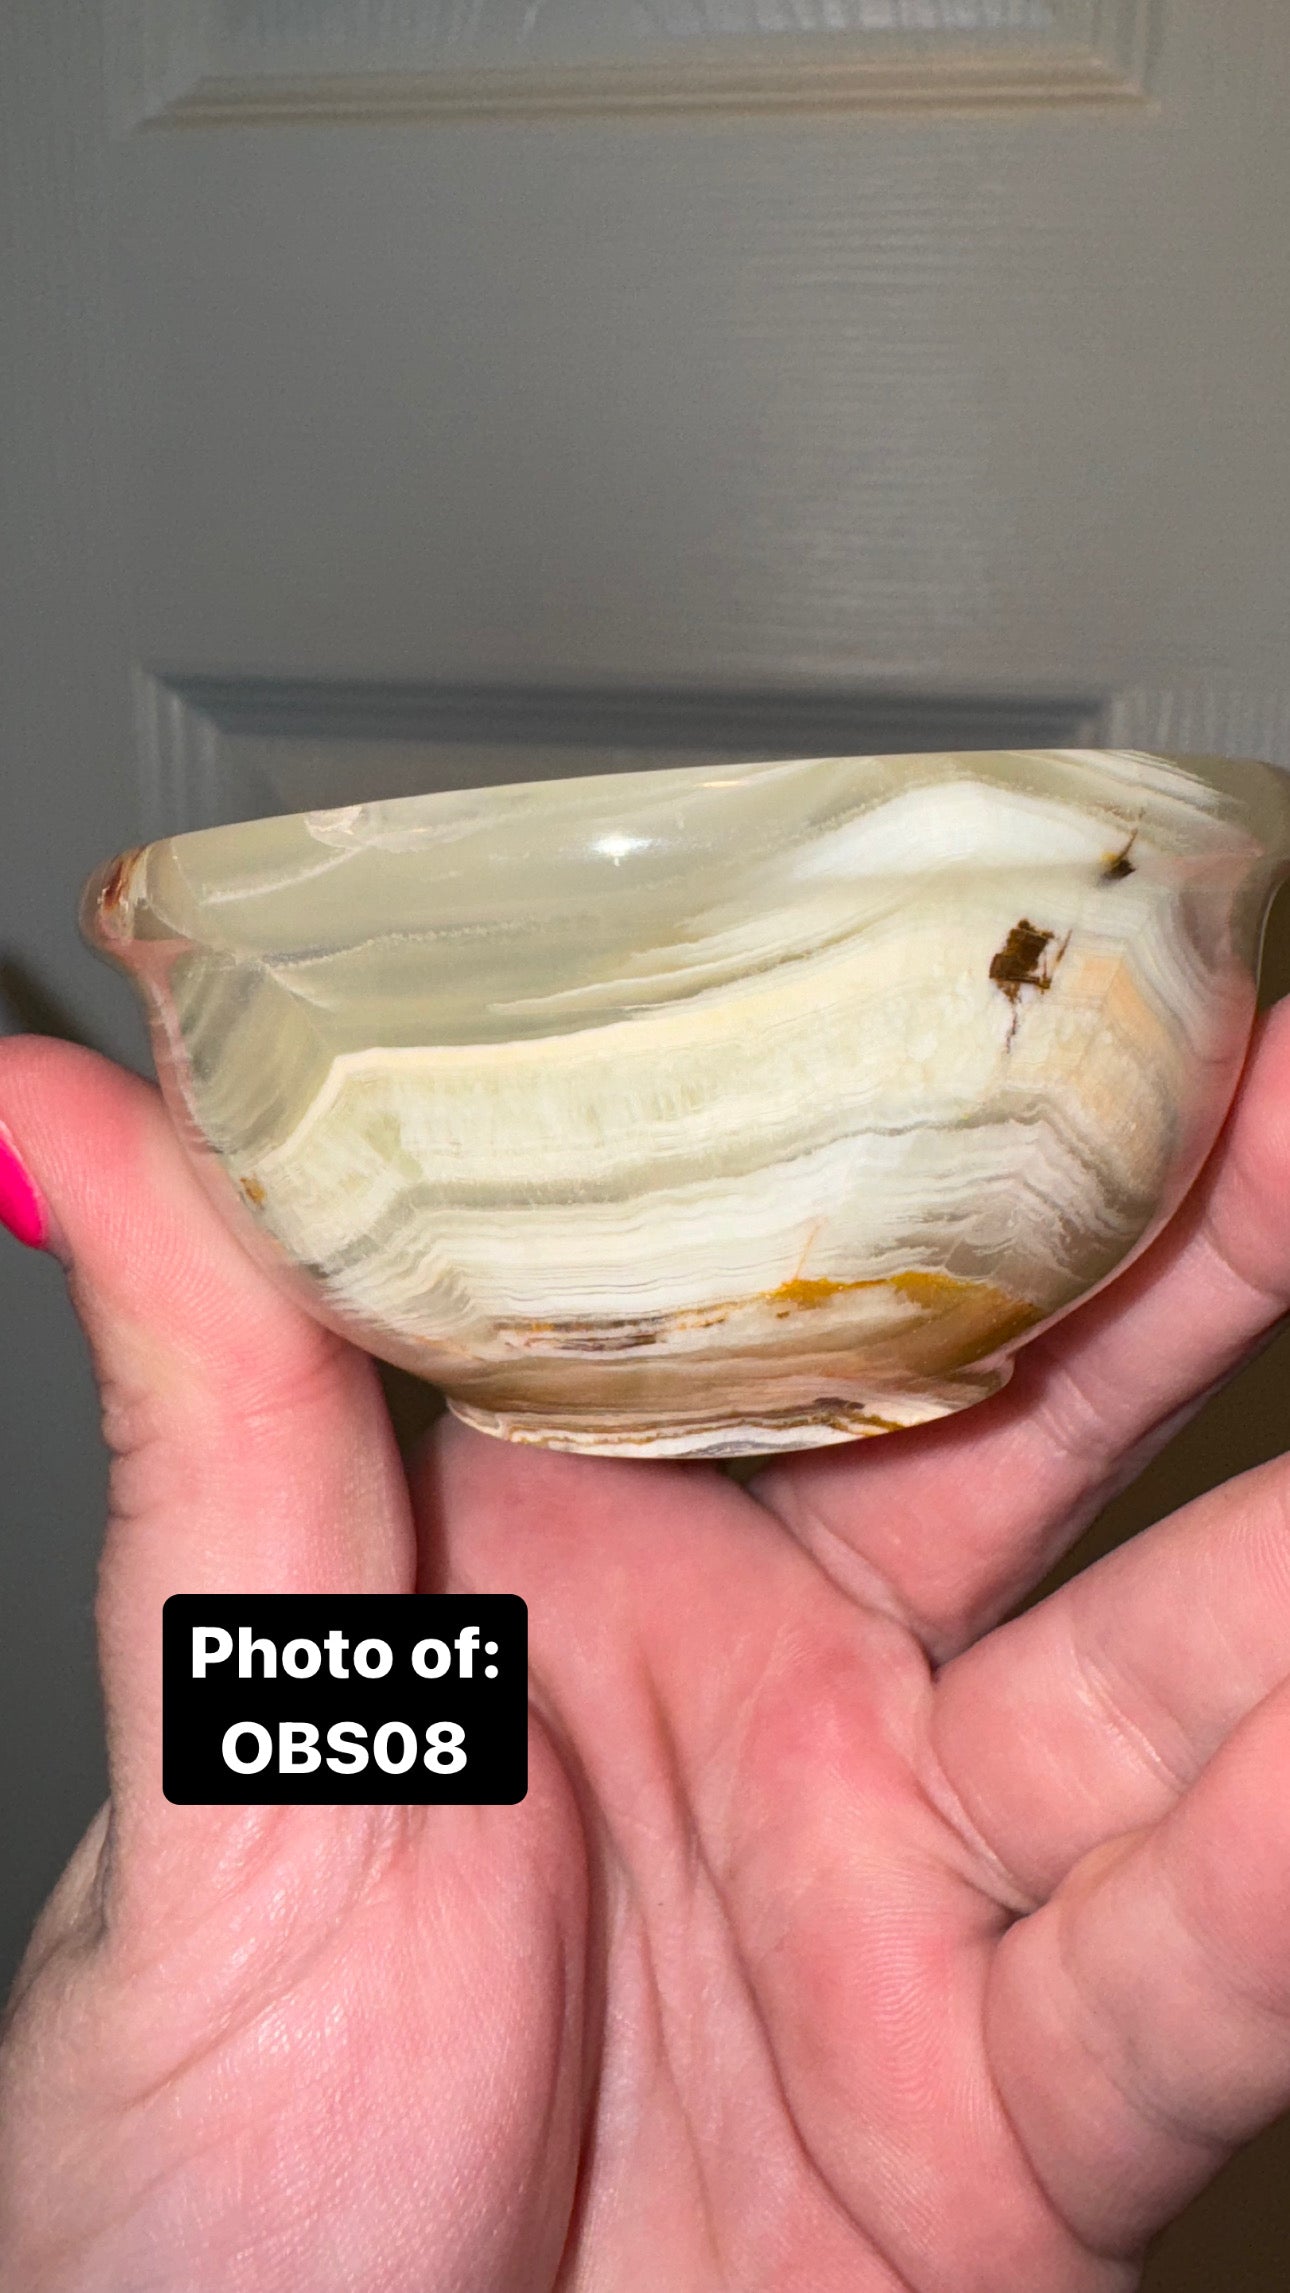 Banded Onyx Small Bowl